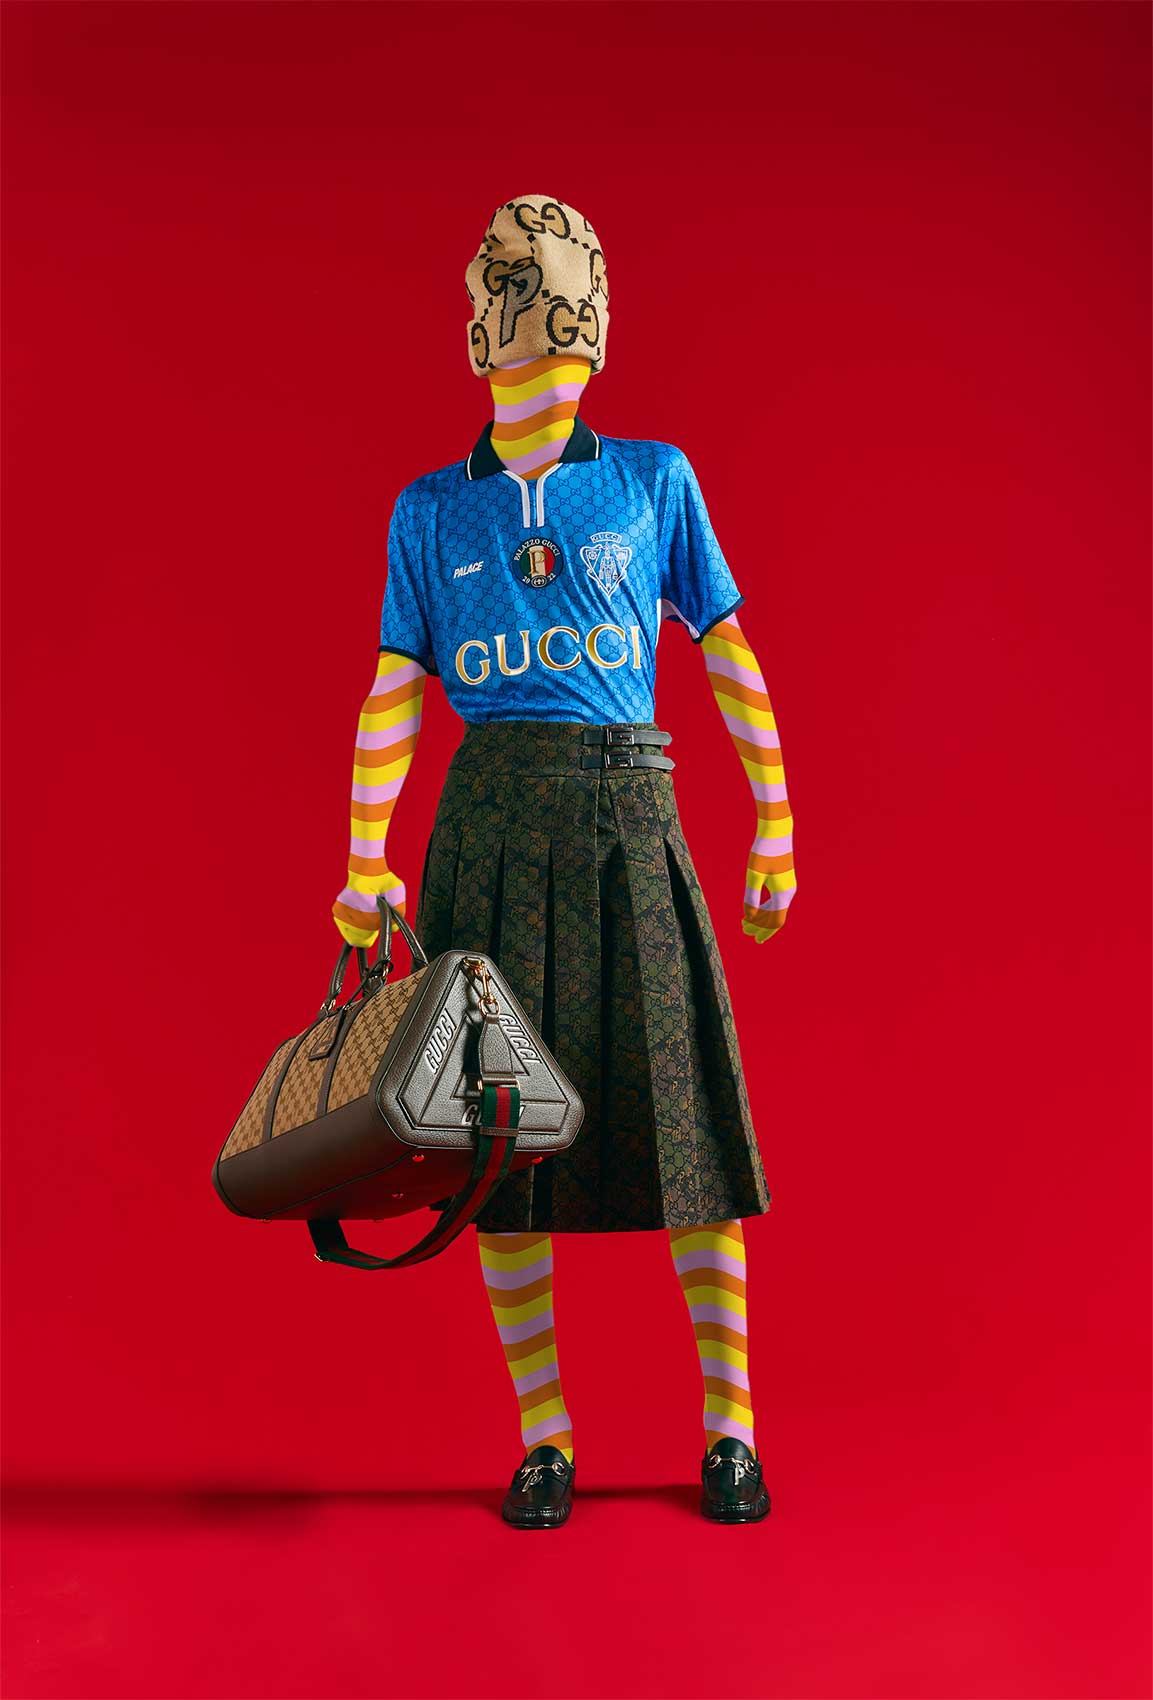 Palace x Gucci Vault Exclusive Collection Announcement